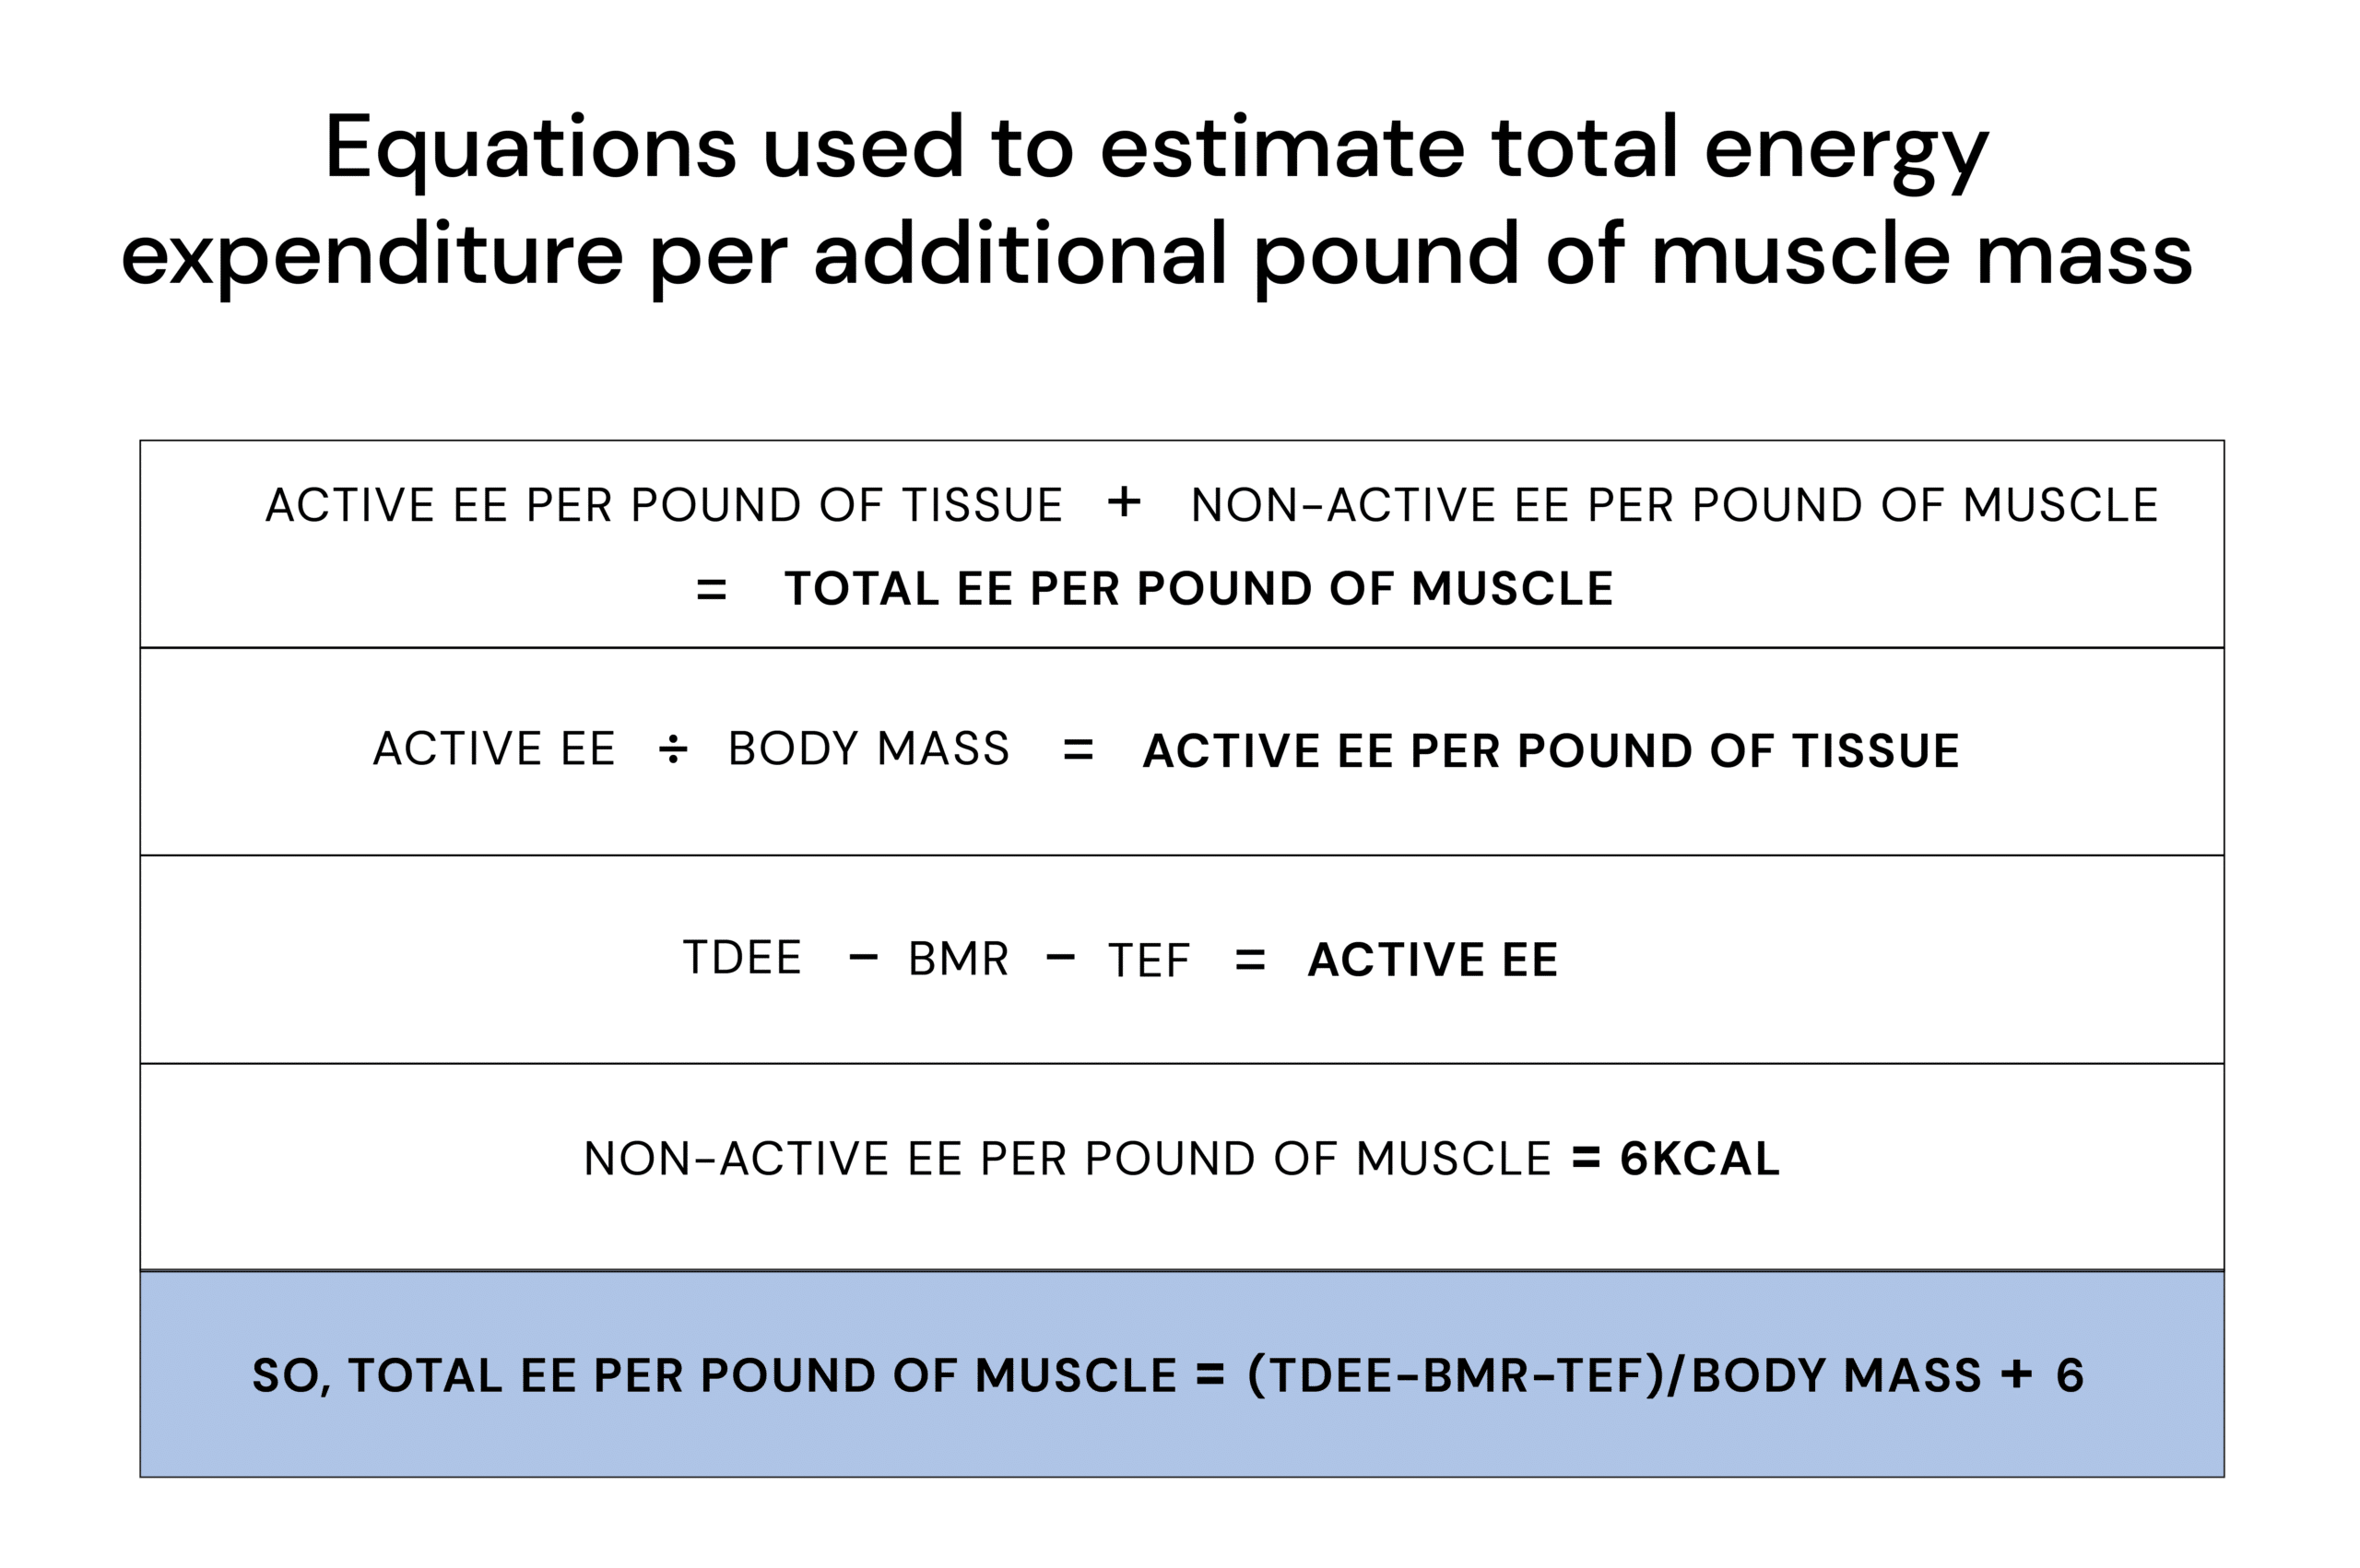 Equations used to estimate total energy expenditure per additional pound of muscle mass